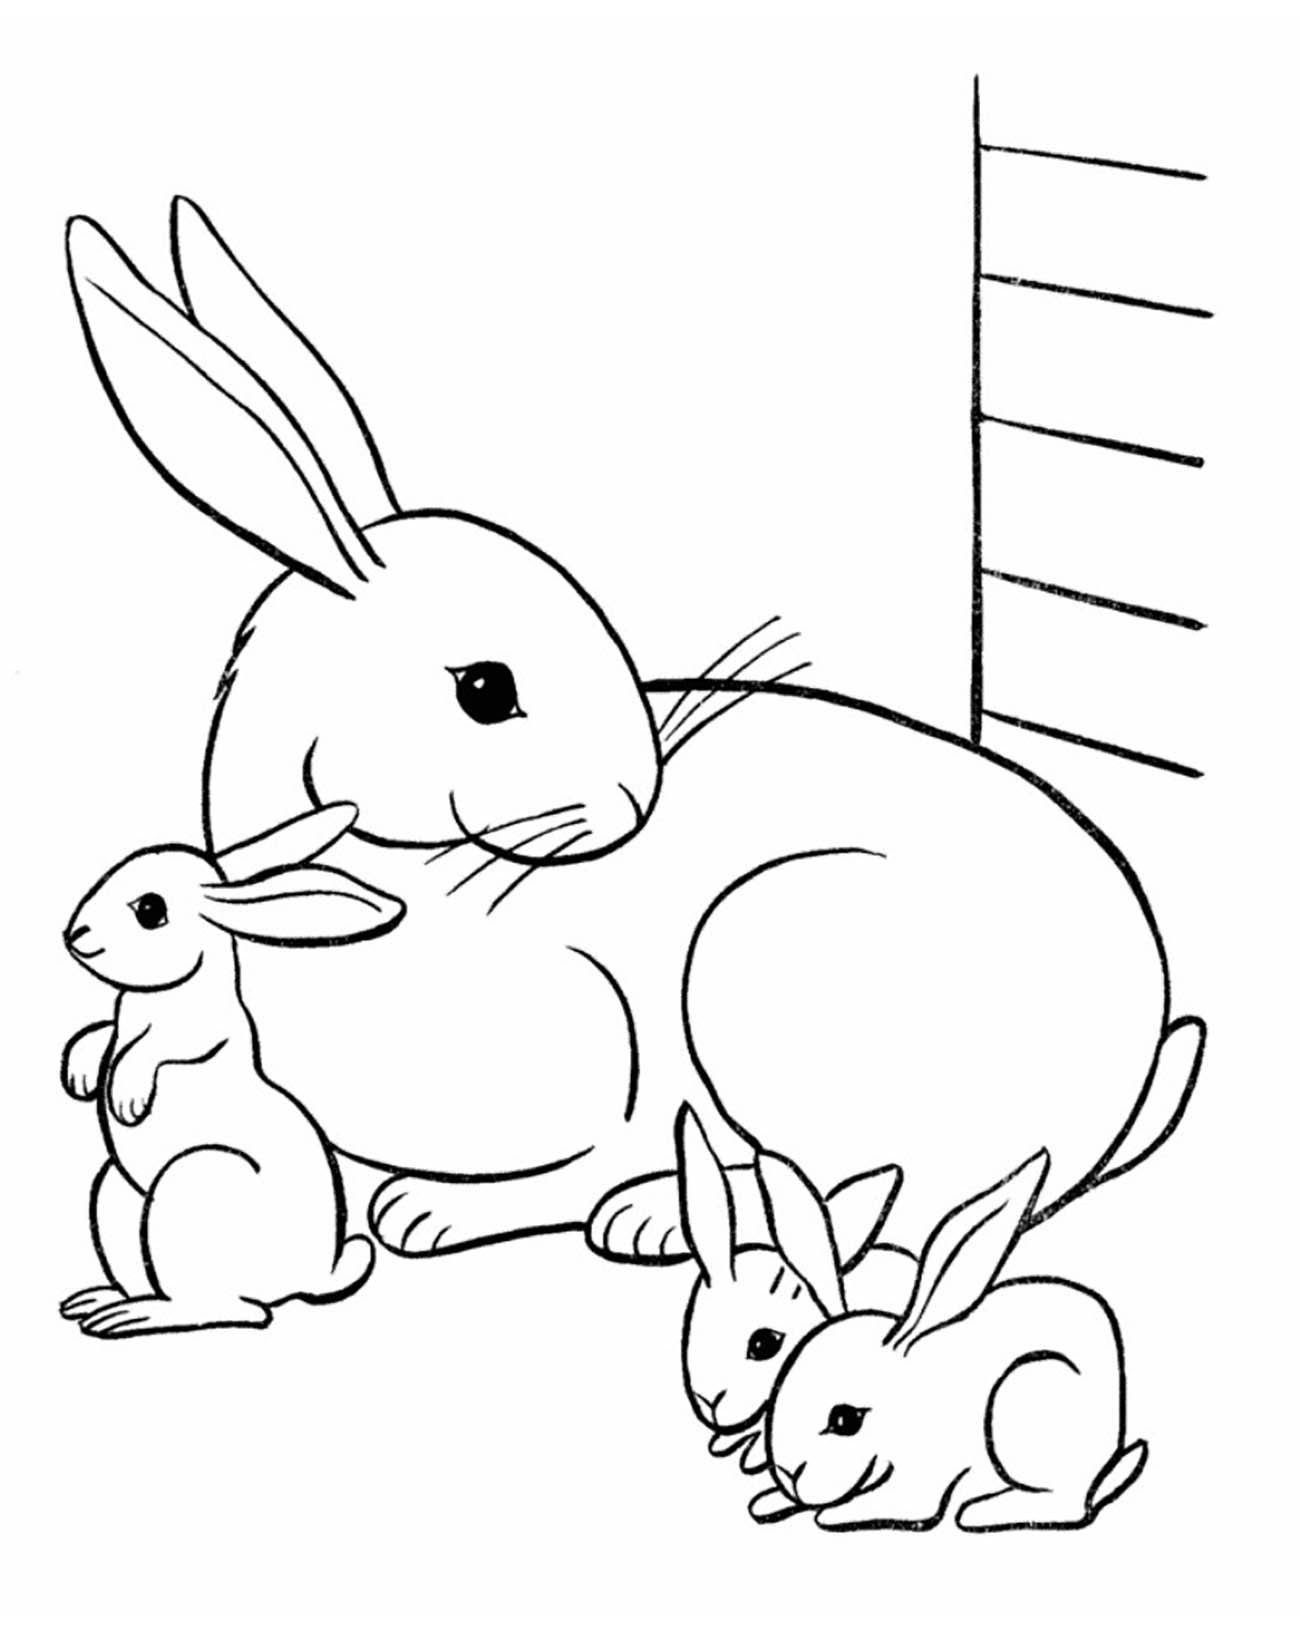 Rabbit family - Rabbits & Bunnies Kids Coloring Pages